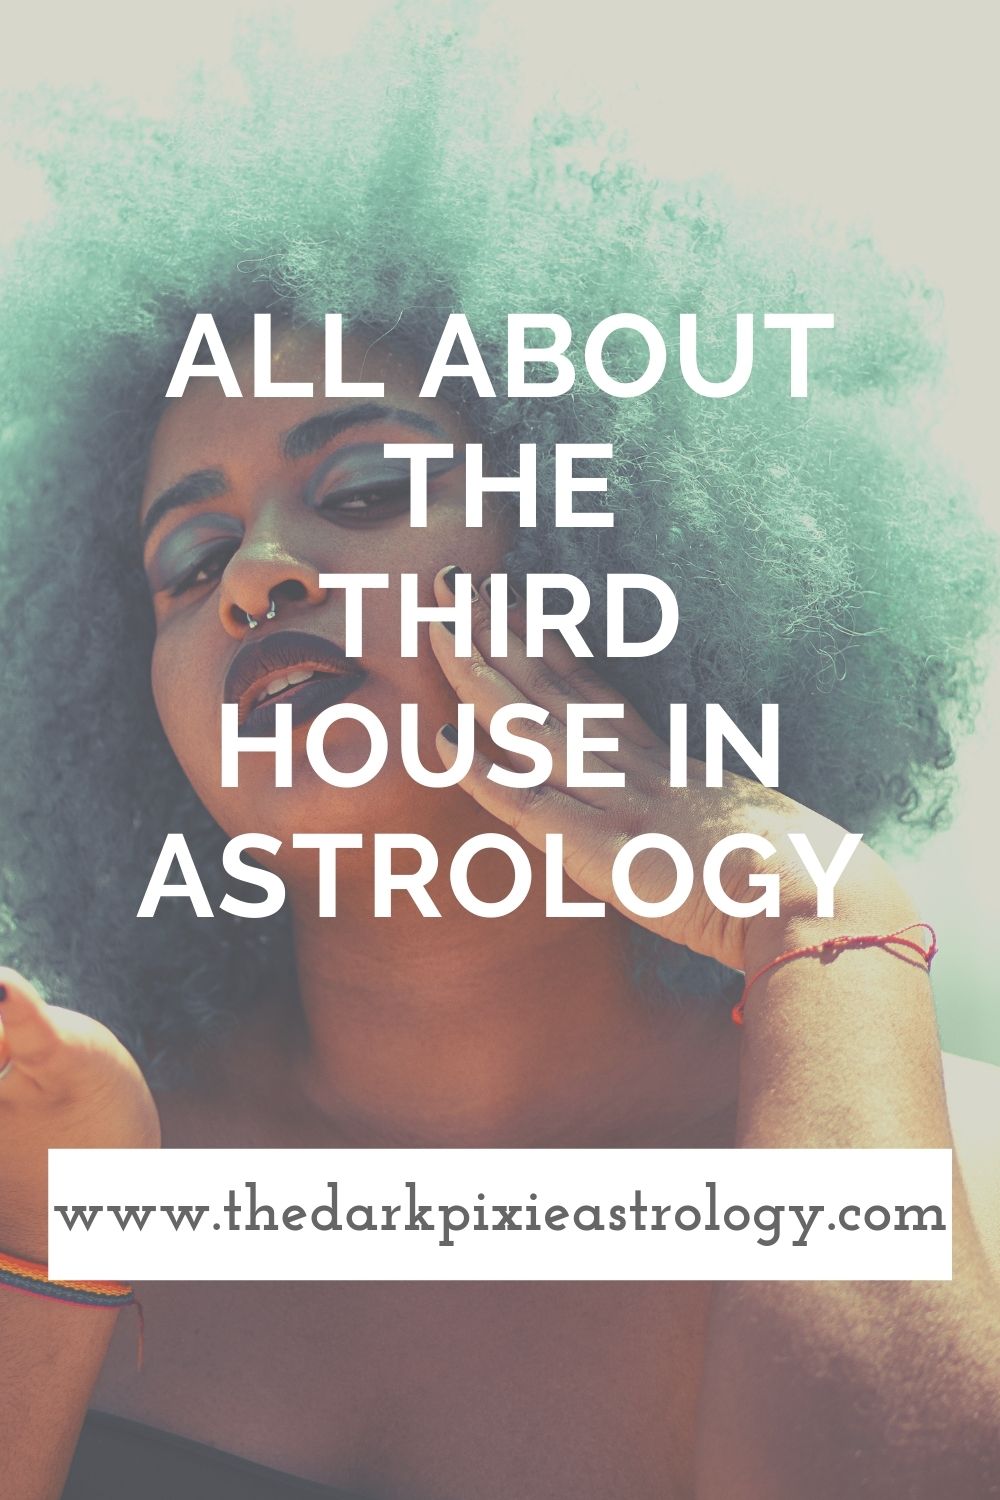 All About the Third House in Astrology - The Dark Pixie Astrology